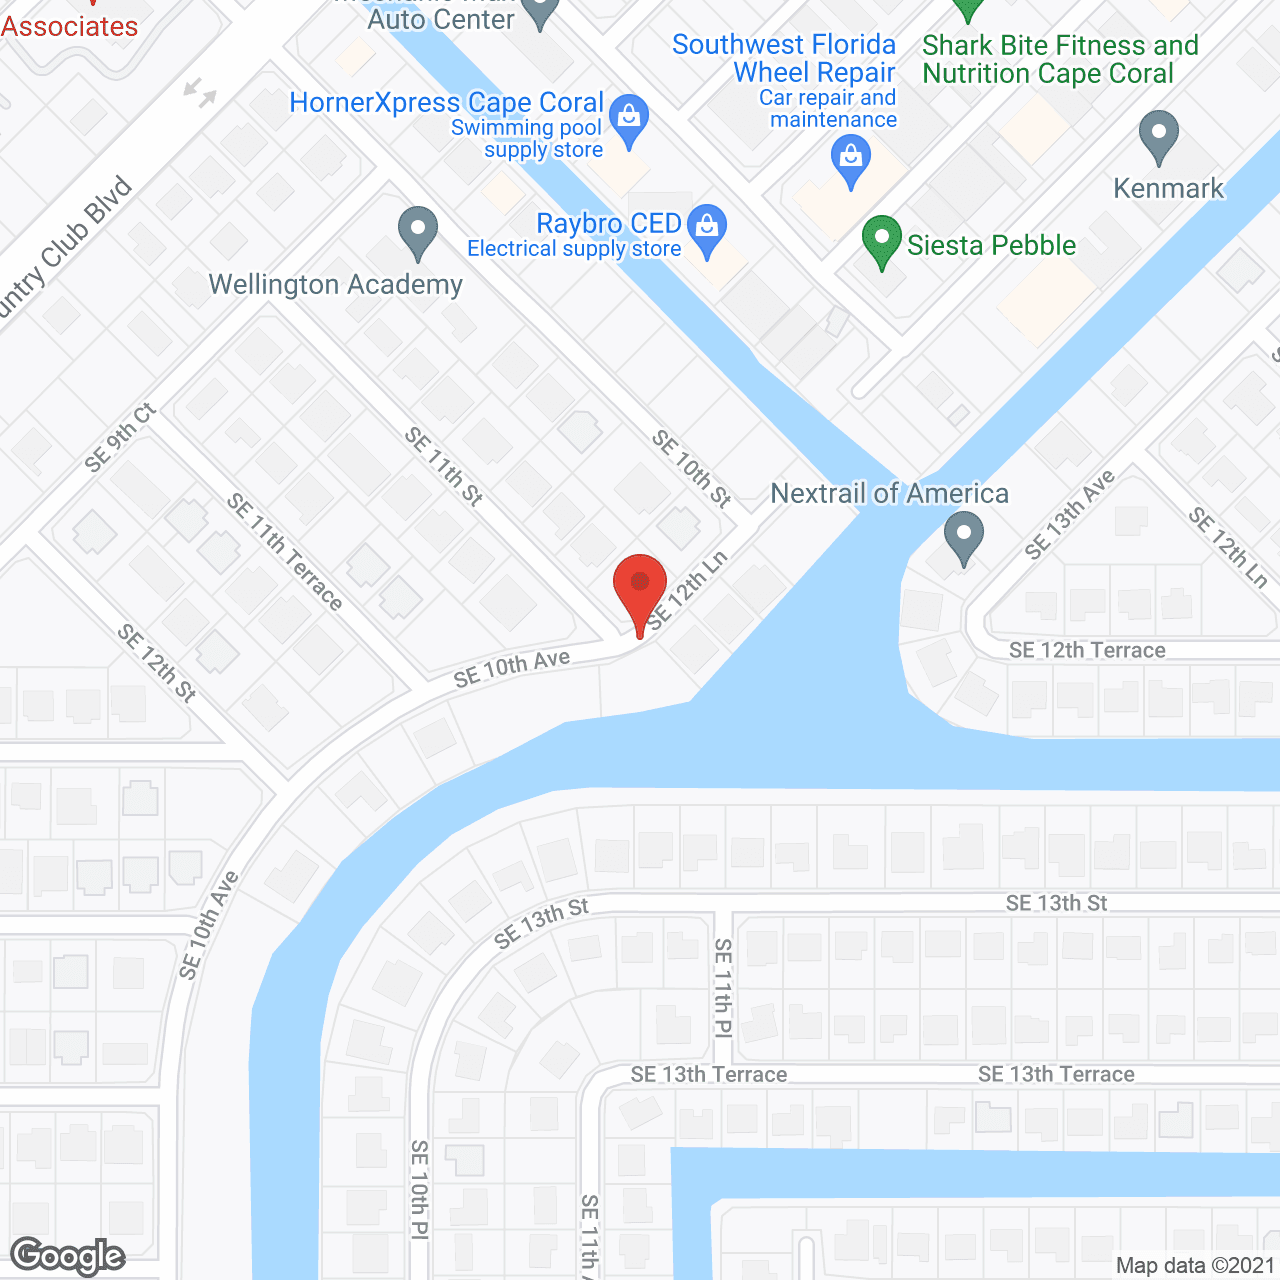 Highpoint at Cape Coral in google map